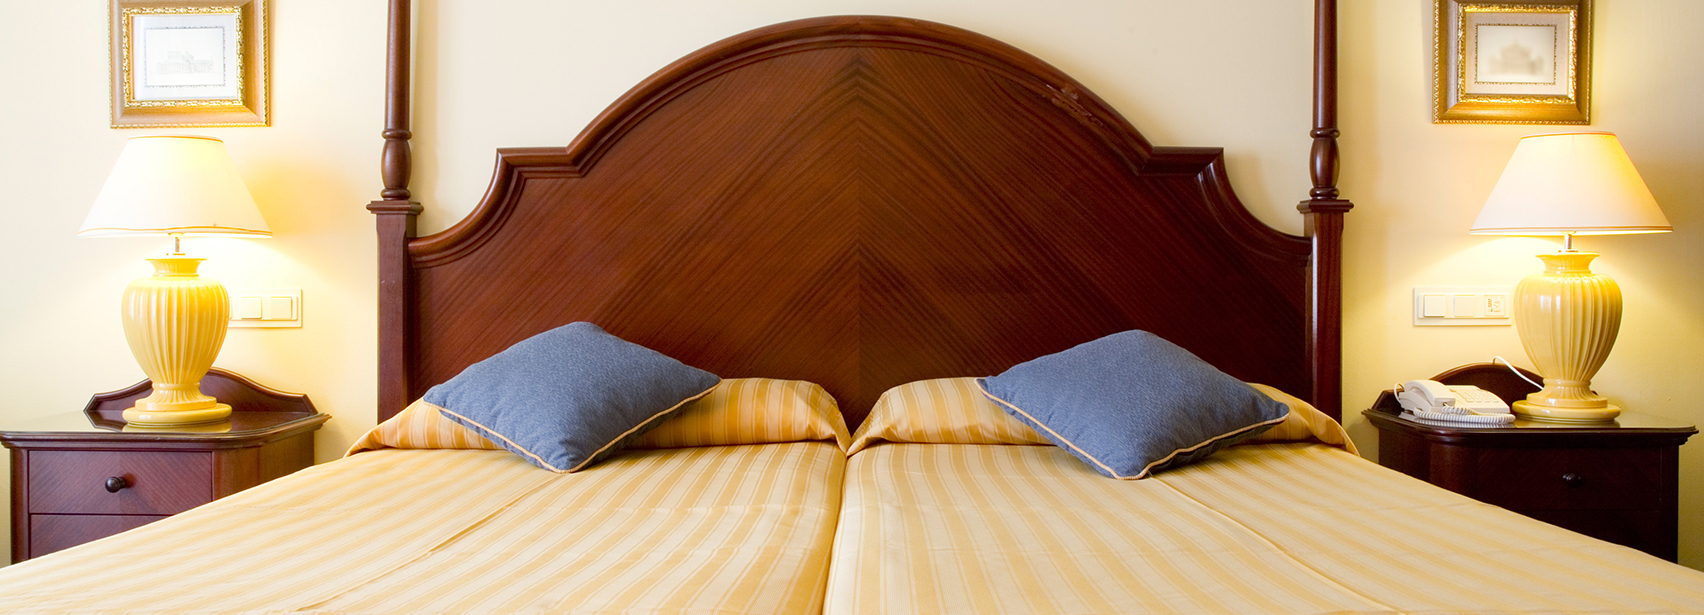 Two Twins Into A King Size Mattress, How To Make A King Bed Out Of Two Twins